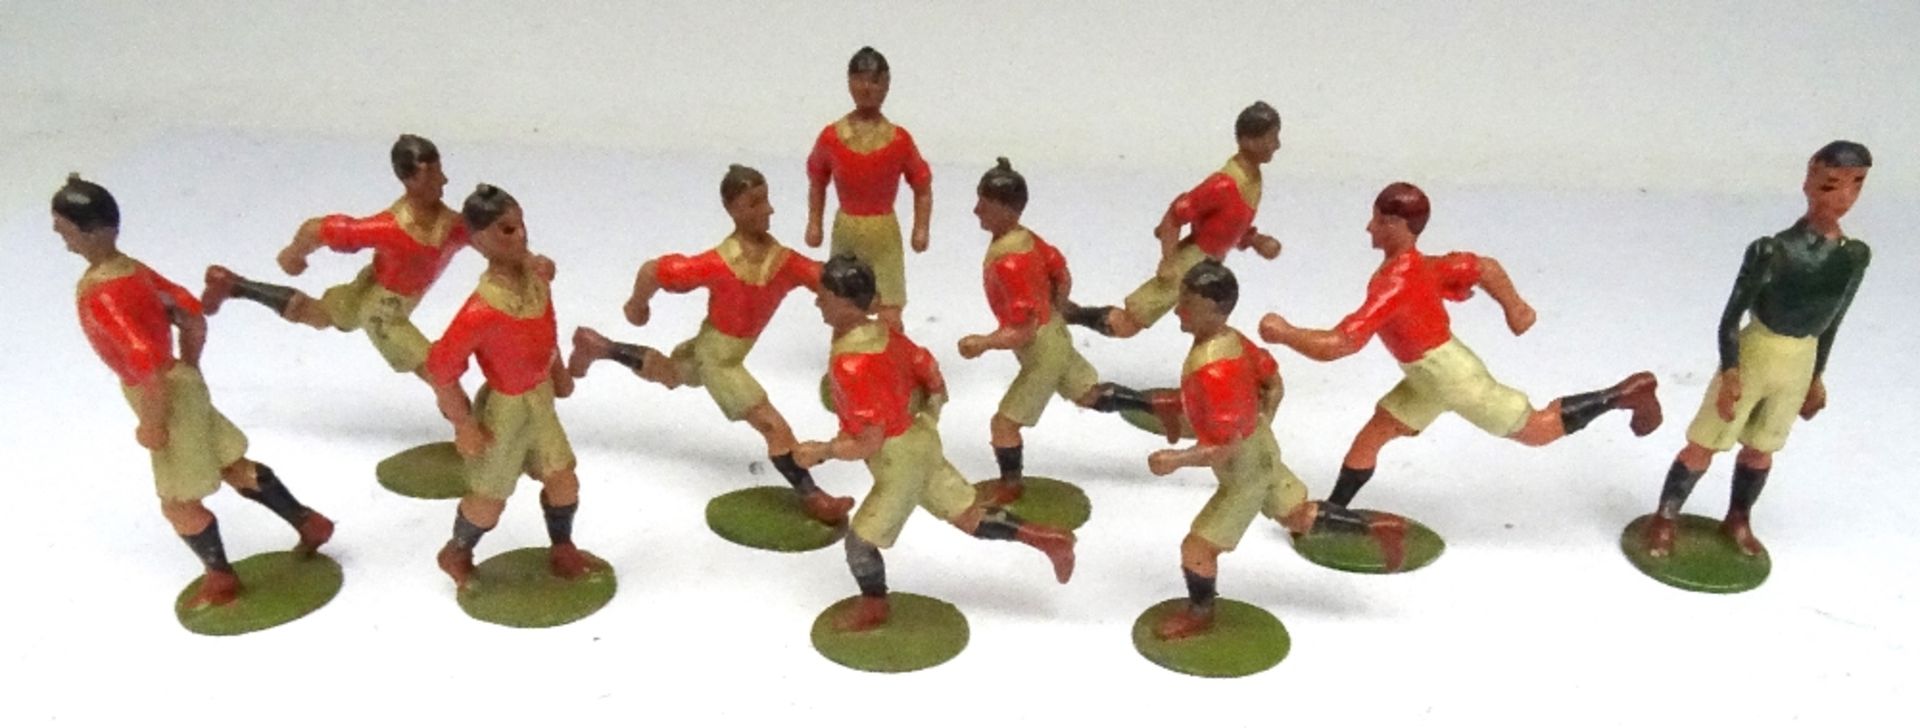 Britains Famous Football Teams MANCHESTER UNITED - Image 3 of 4